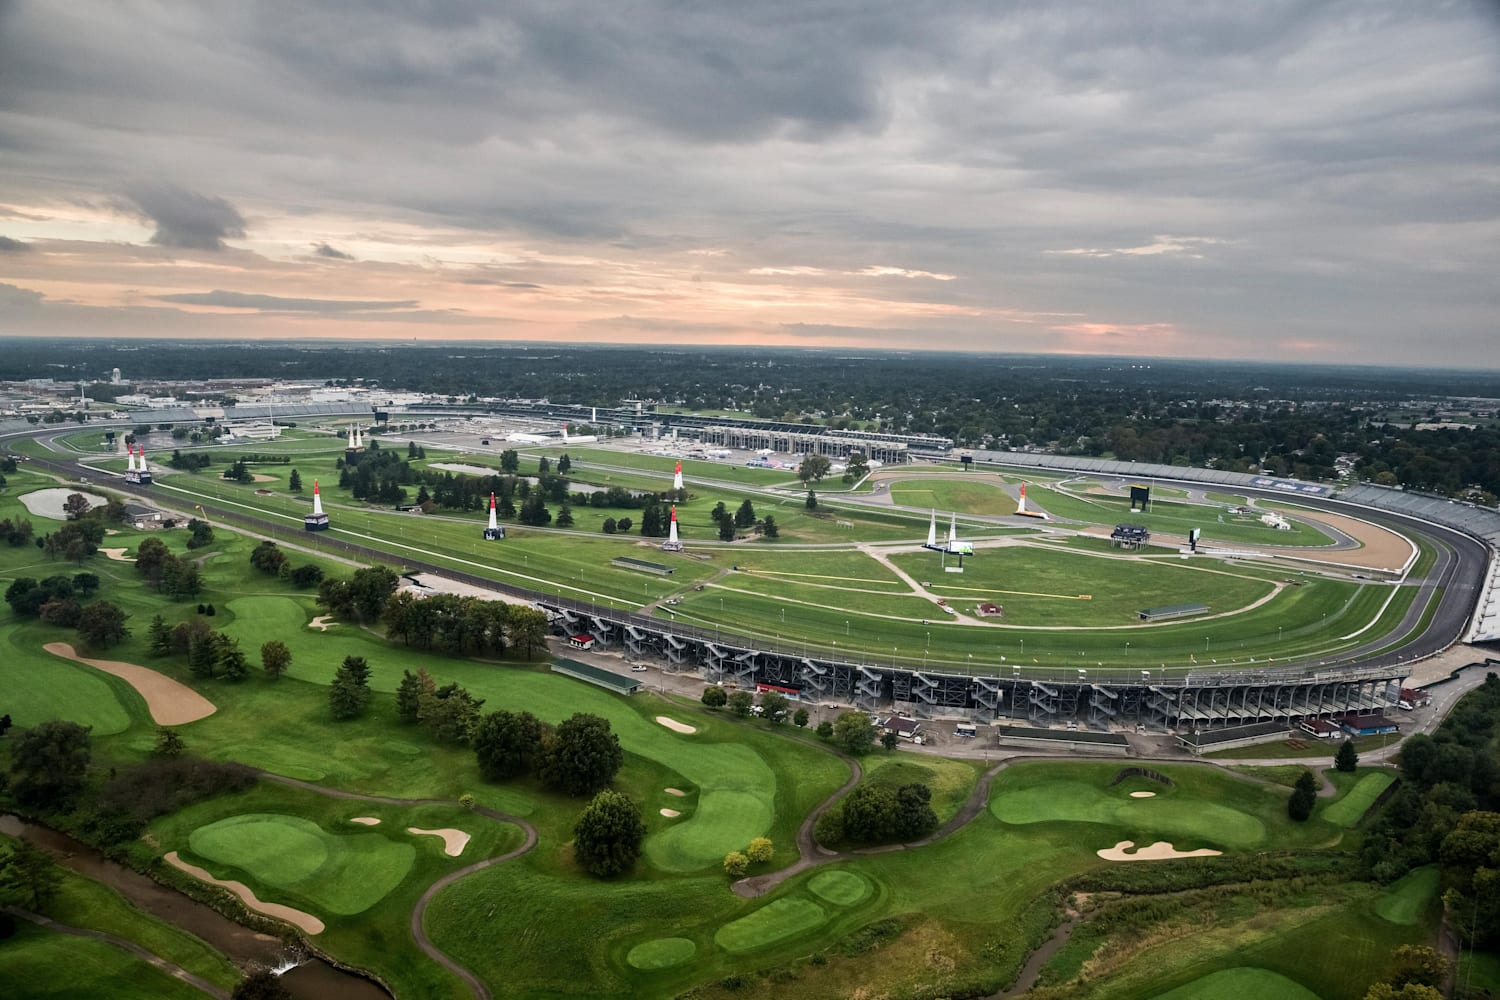 Red Bull Air Race 2018 Indianapolis +Live Event Page+